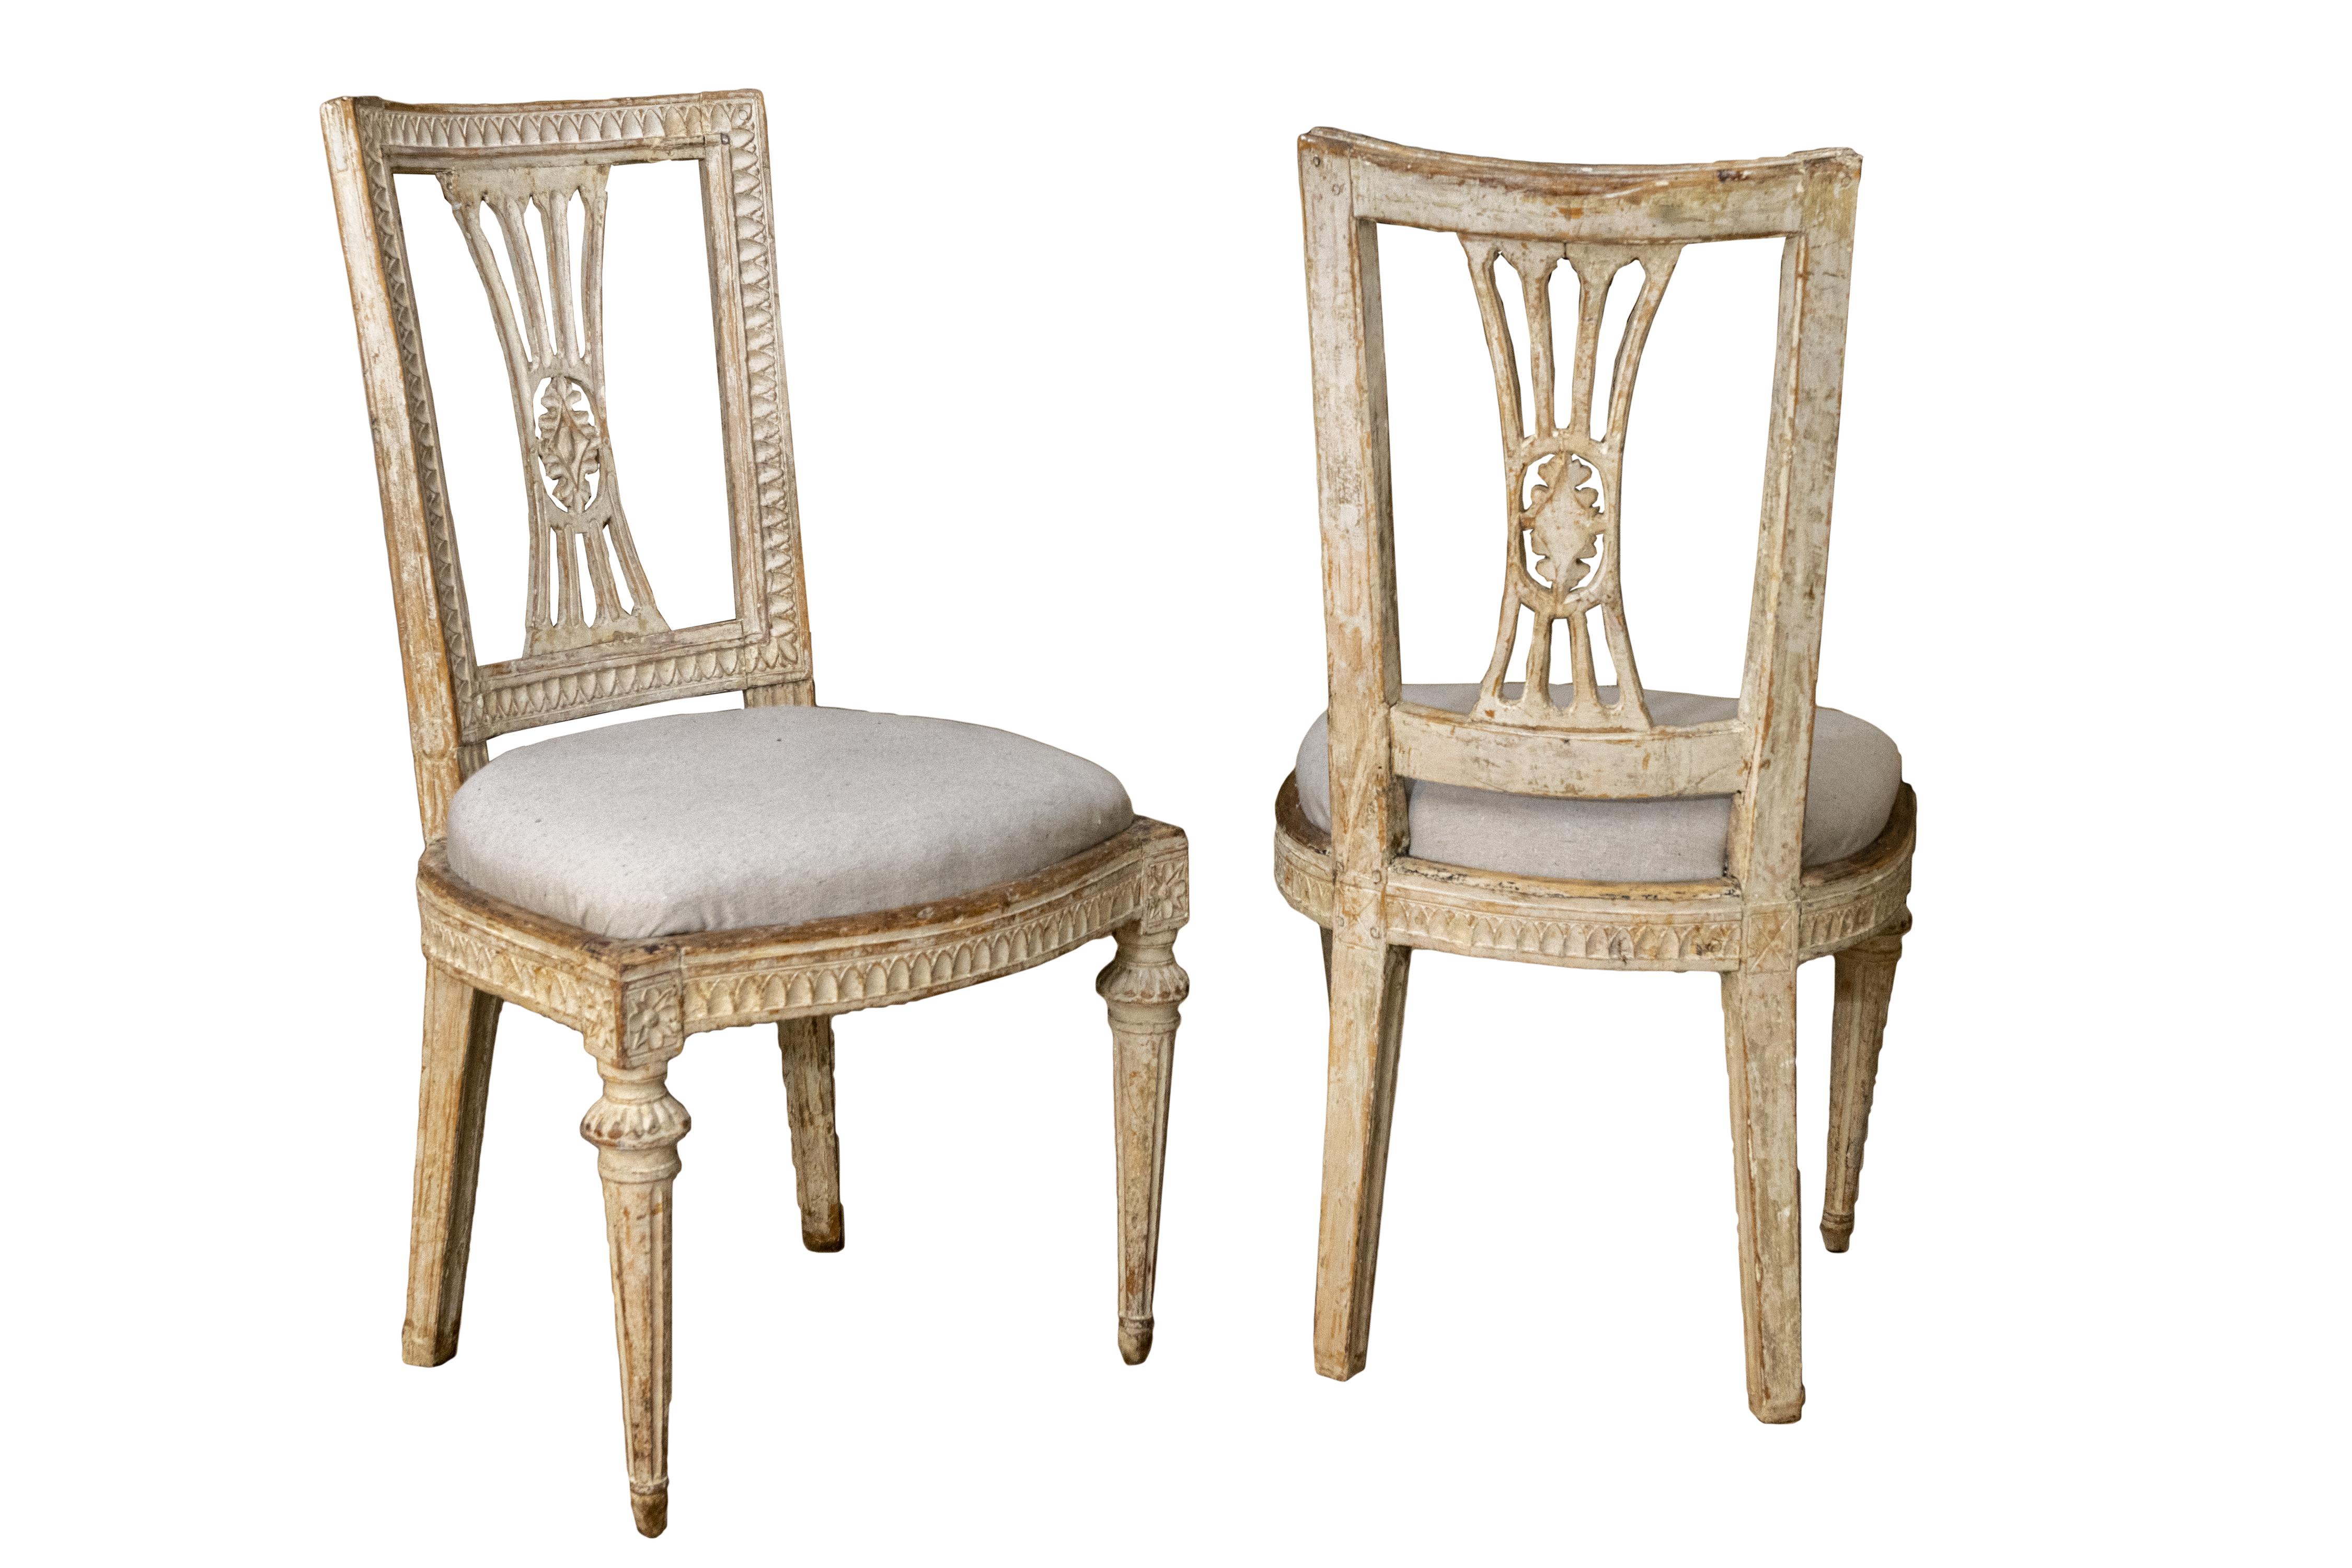 A matched set of early 19th century painted and hand carved Gustavian dining chairs.
Two arm chairs and four chairs. The four chairs have drop in upholstered seats.
The chairs are hand carved all around the back and seats and arms. The four arms